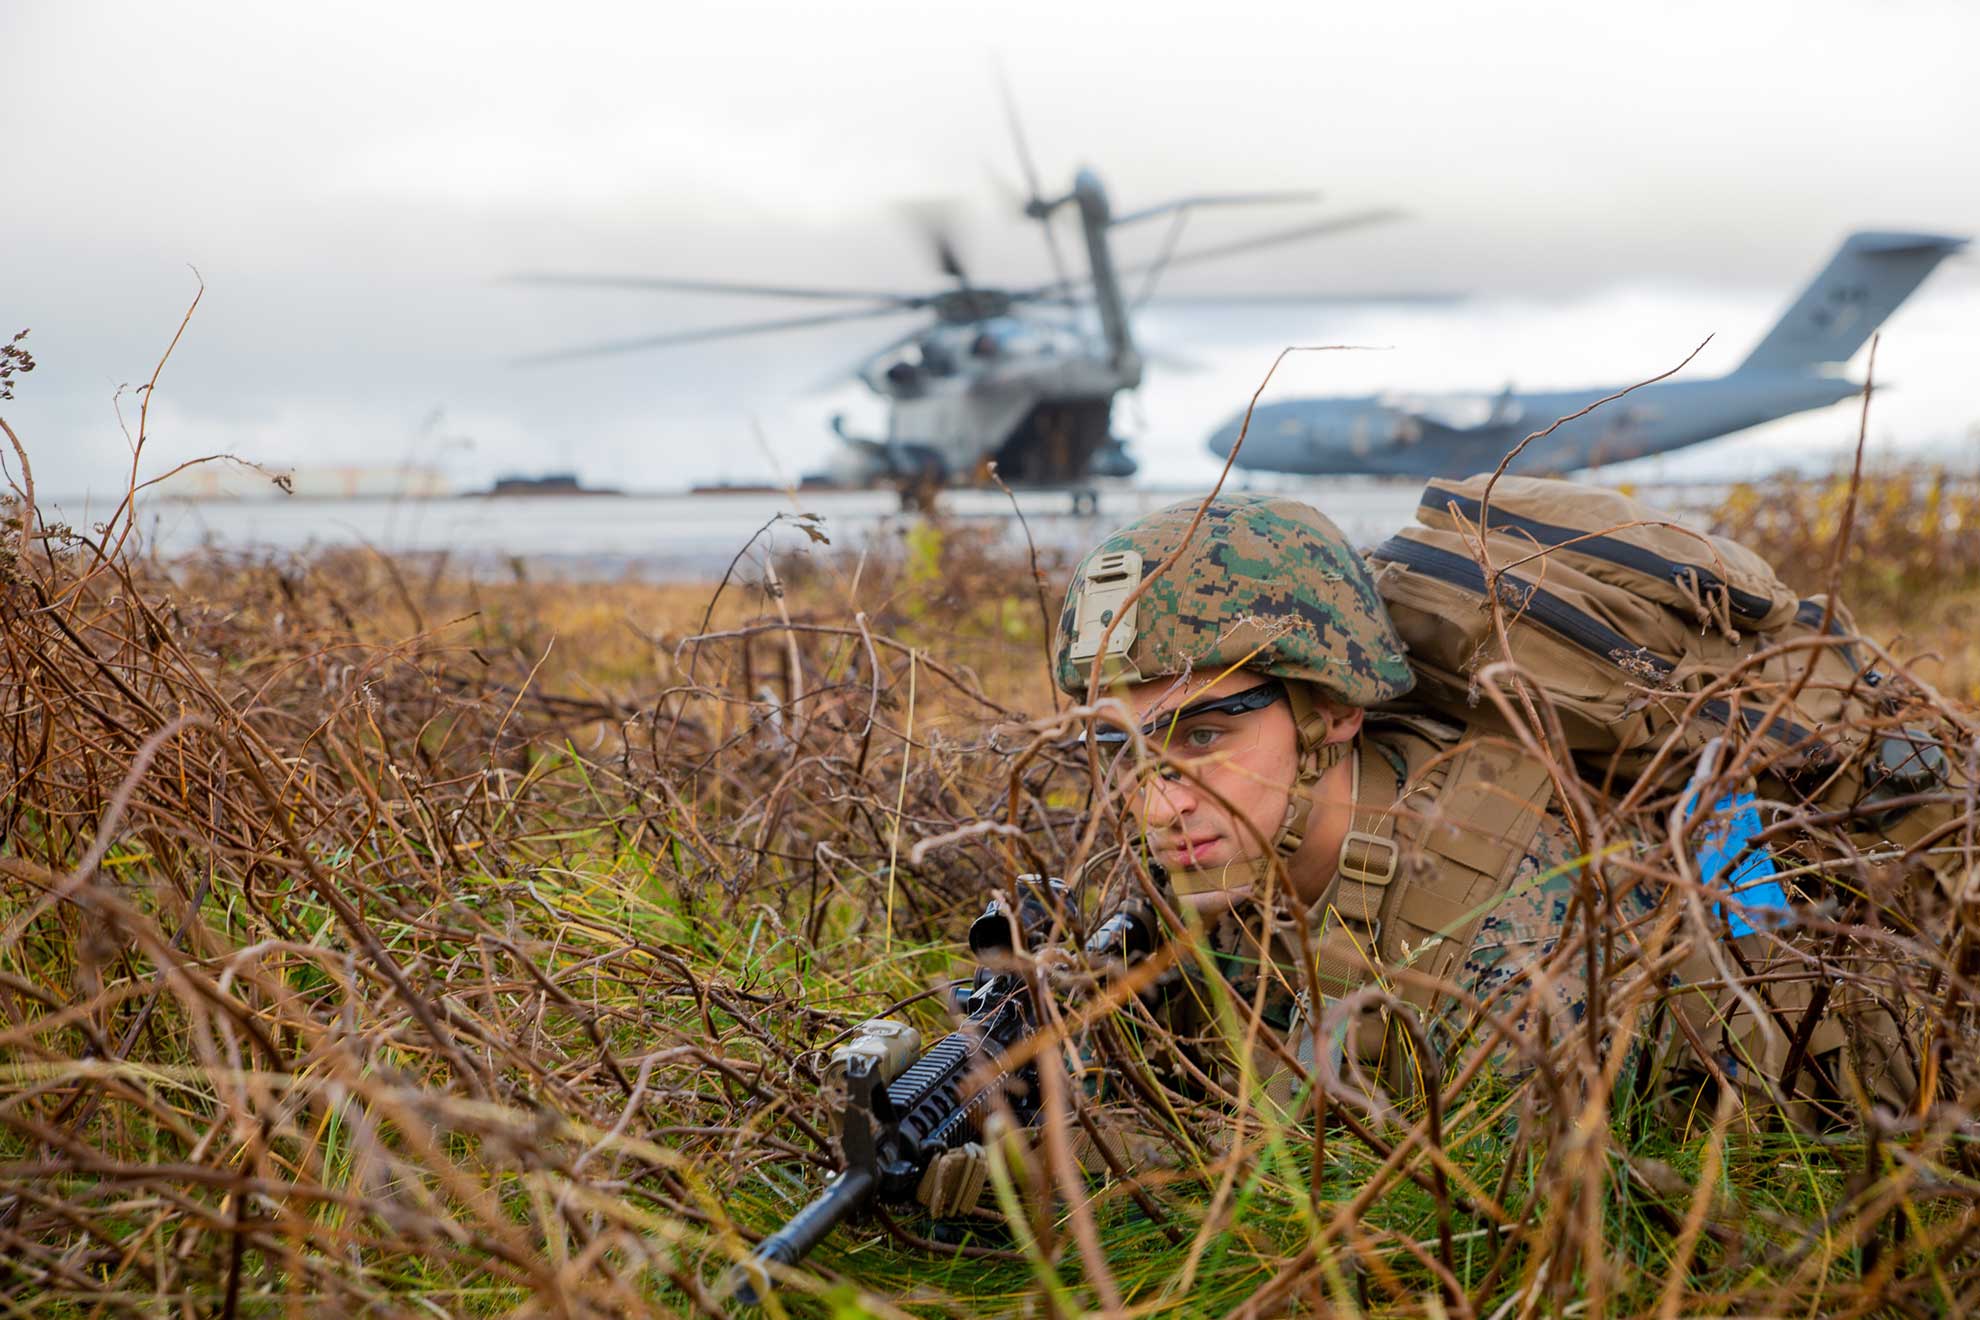 Keflavik, Iceland (Oct. 17, 2018) A U.S. Marine assigned to the 24th Marine Expeditionary Unit (MEU) posts security at Keflavik Air Base in Iceland, Oct. 17, 2018, during Exercise Trident Juncture 18. Trident Juncture training in Iceland promotes key elements of preparing Marines to conduct follow-on training in Norway in the later part of the exercise -- U.S. Marine Corps photo by Lance Cpl. Menelik Collins. -